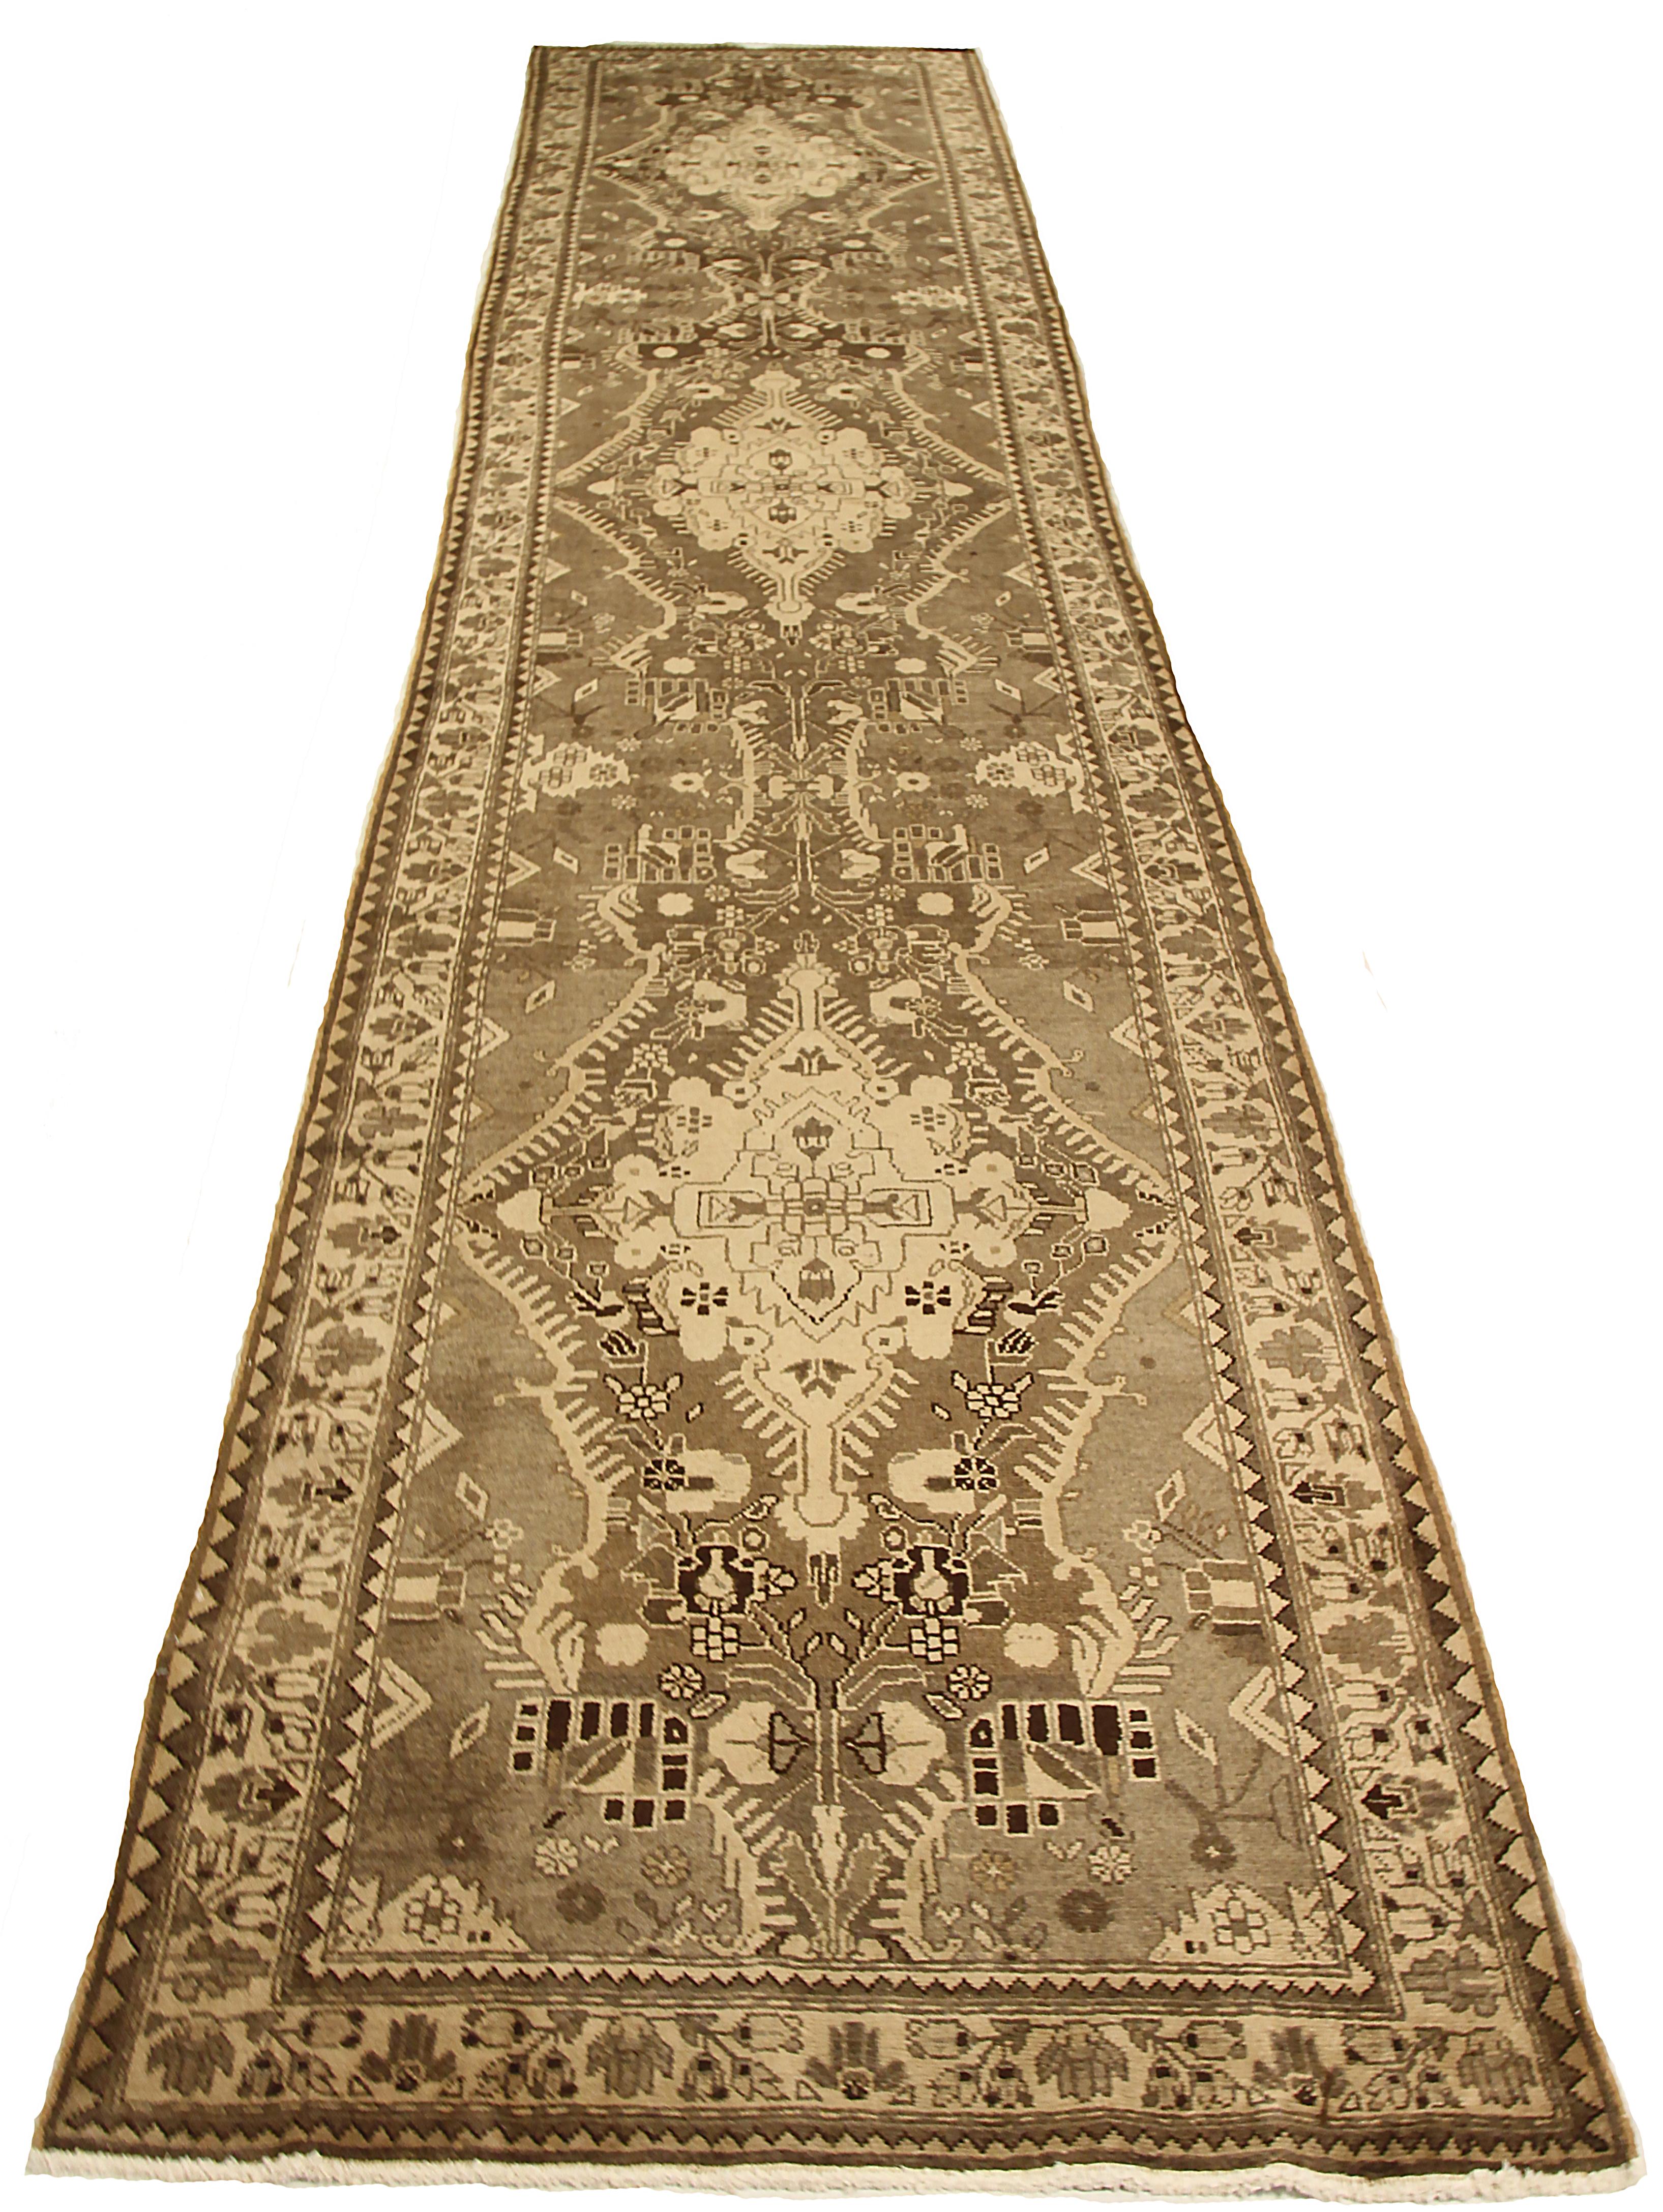 Antique Persian runner rug handwoven from the finest sheep’s wool. It’s colored with all-natural vegetable dyes that are safe for humans and pets. It’s a traditional Azerbaijan design featuring tribal details on a brown field. It’s a lovely piece to